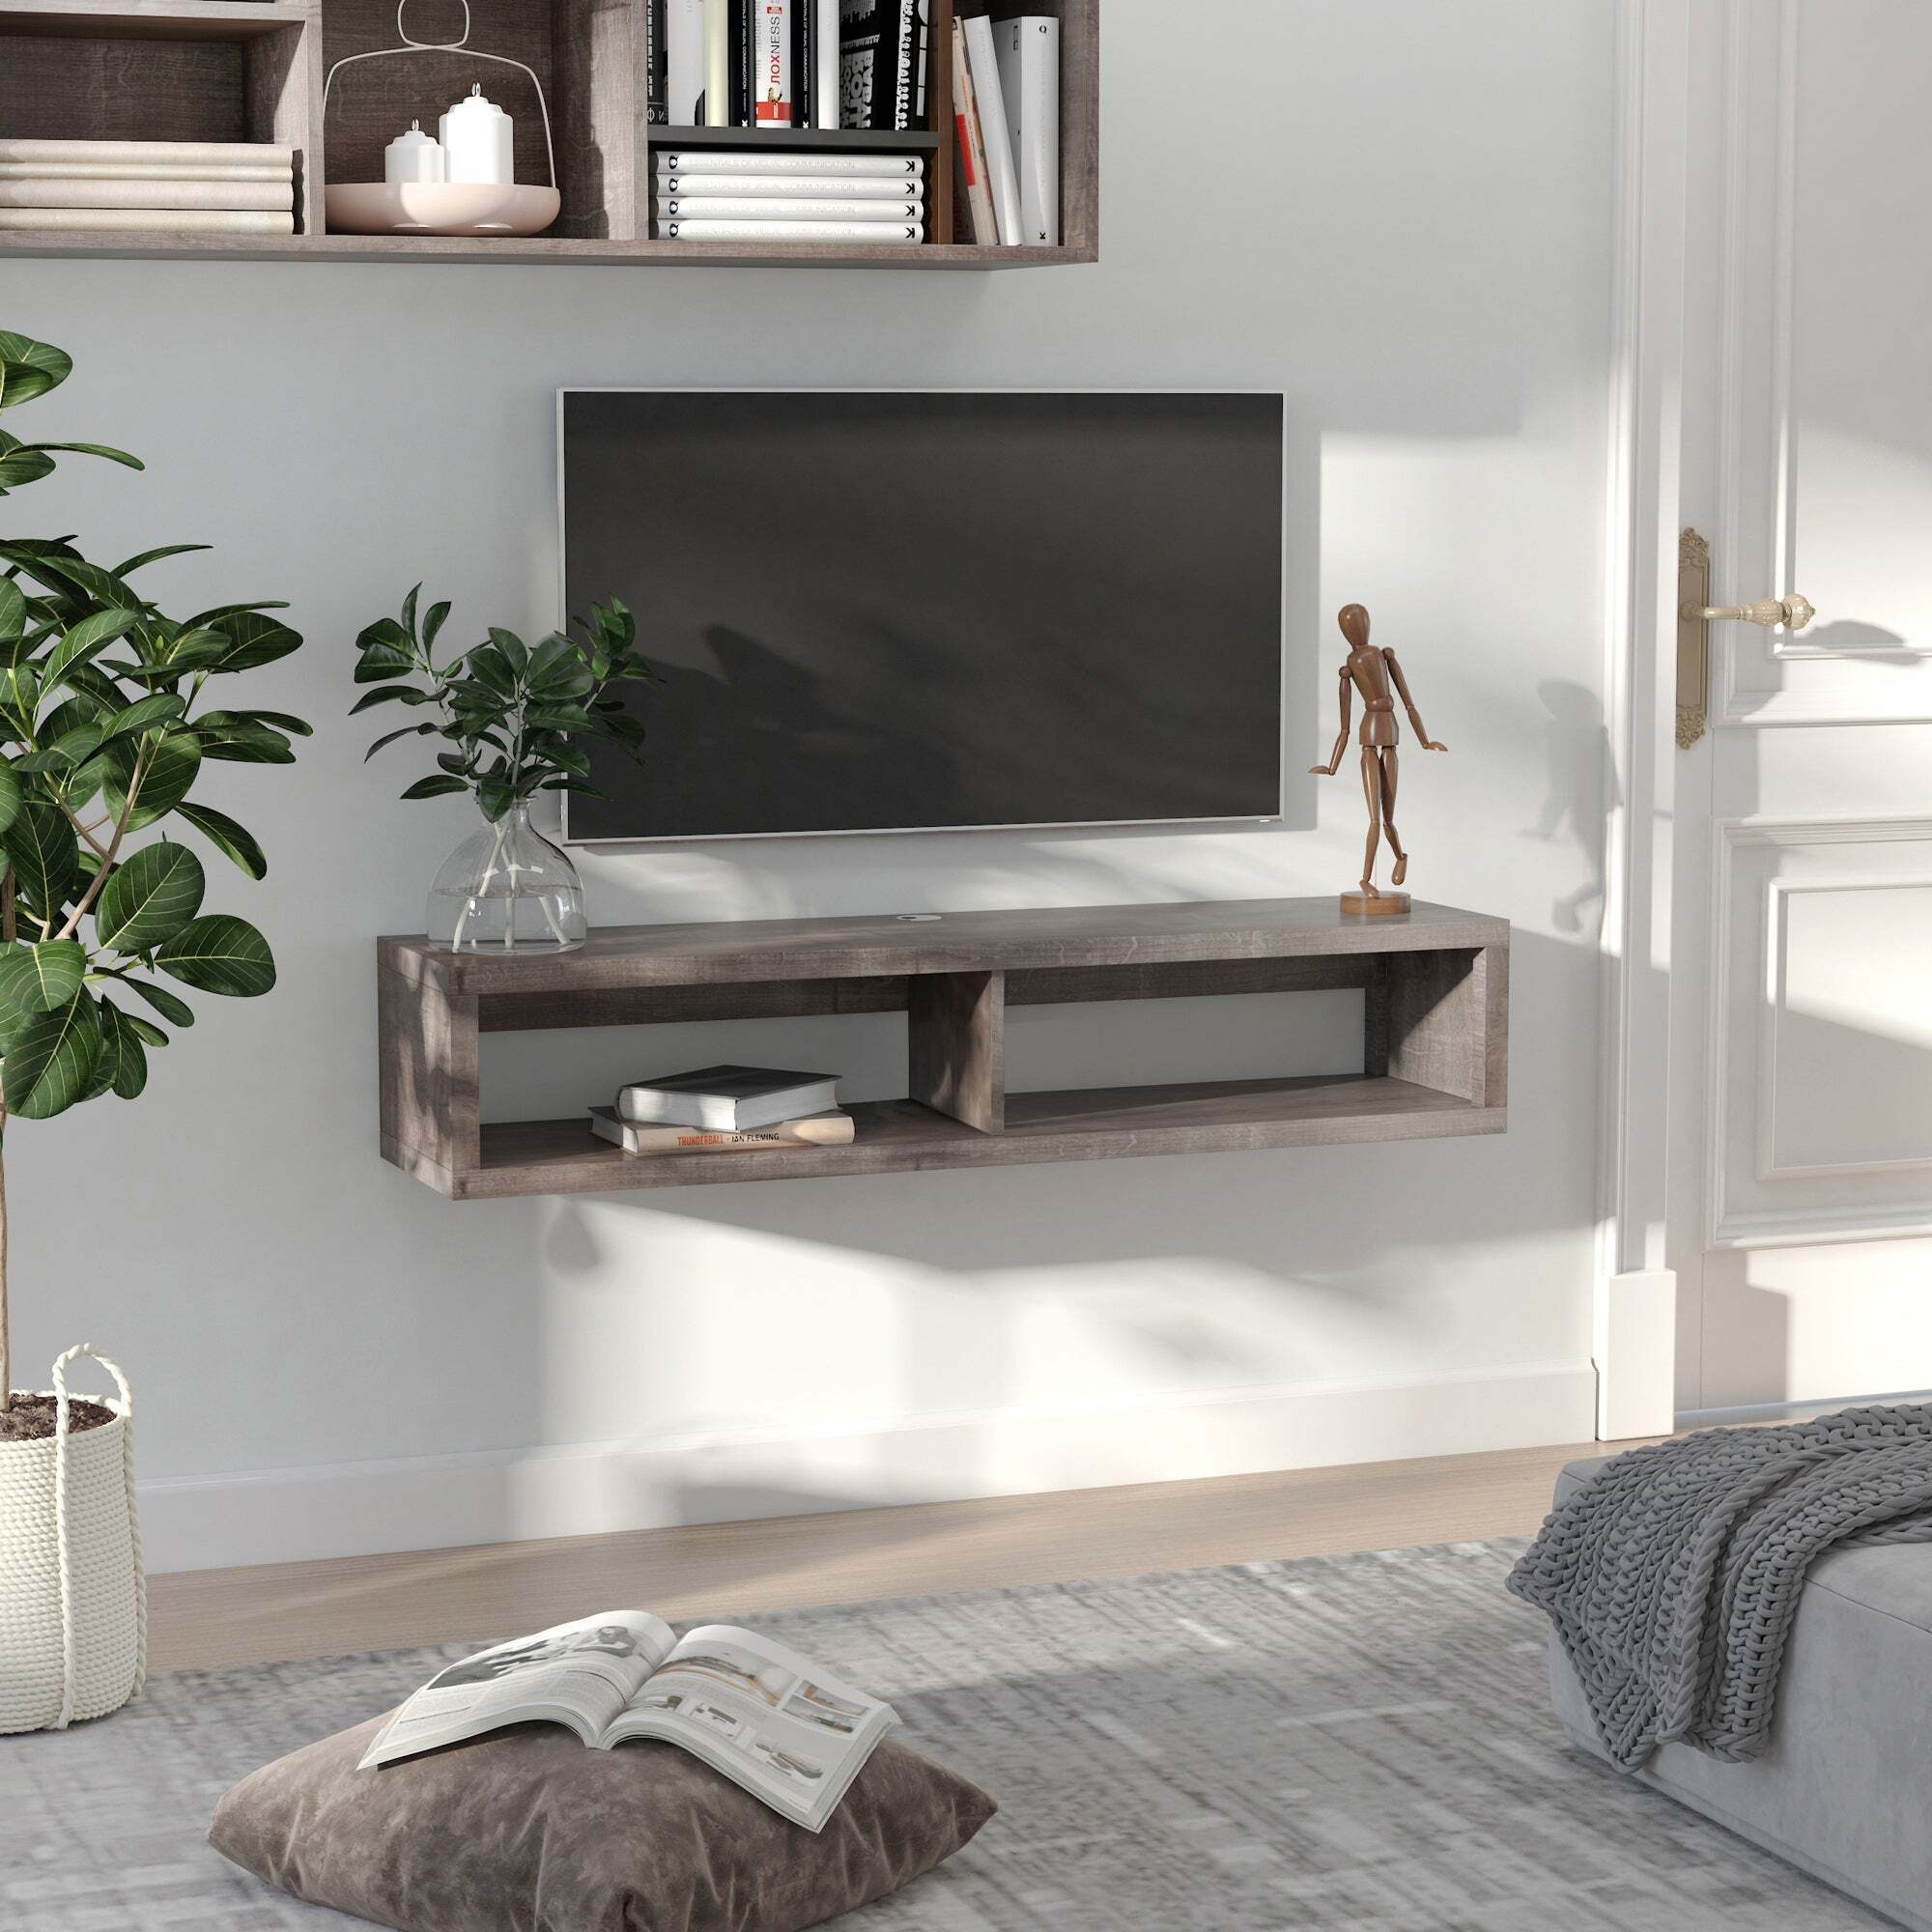 Open Wood Floating Shelves for TV Accessories